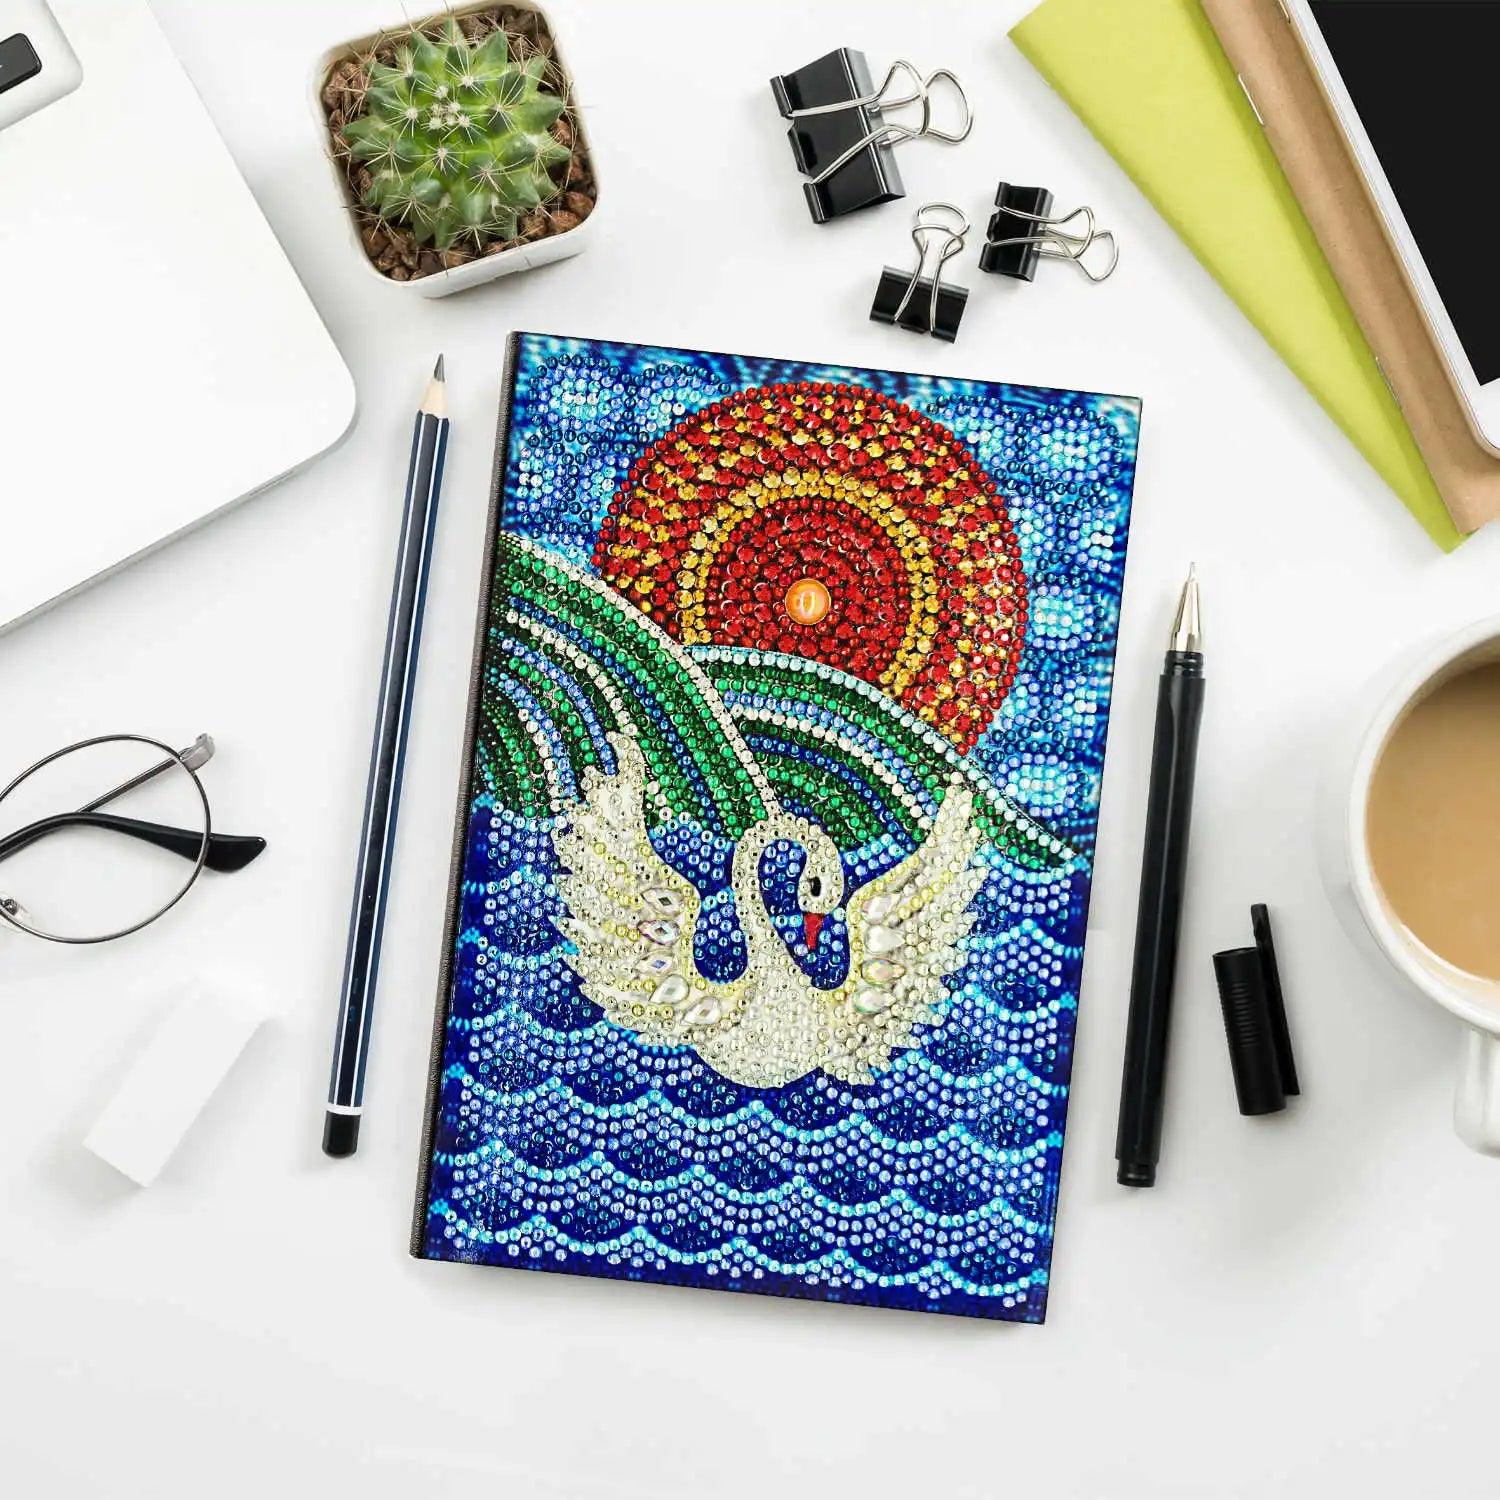 AZQSD Diamond Painting Mosaic Notebook Special Shaped Flower Mandala Patterns A5 Diary Book Embroidery Gift DIY - YOURISHOP.COM